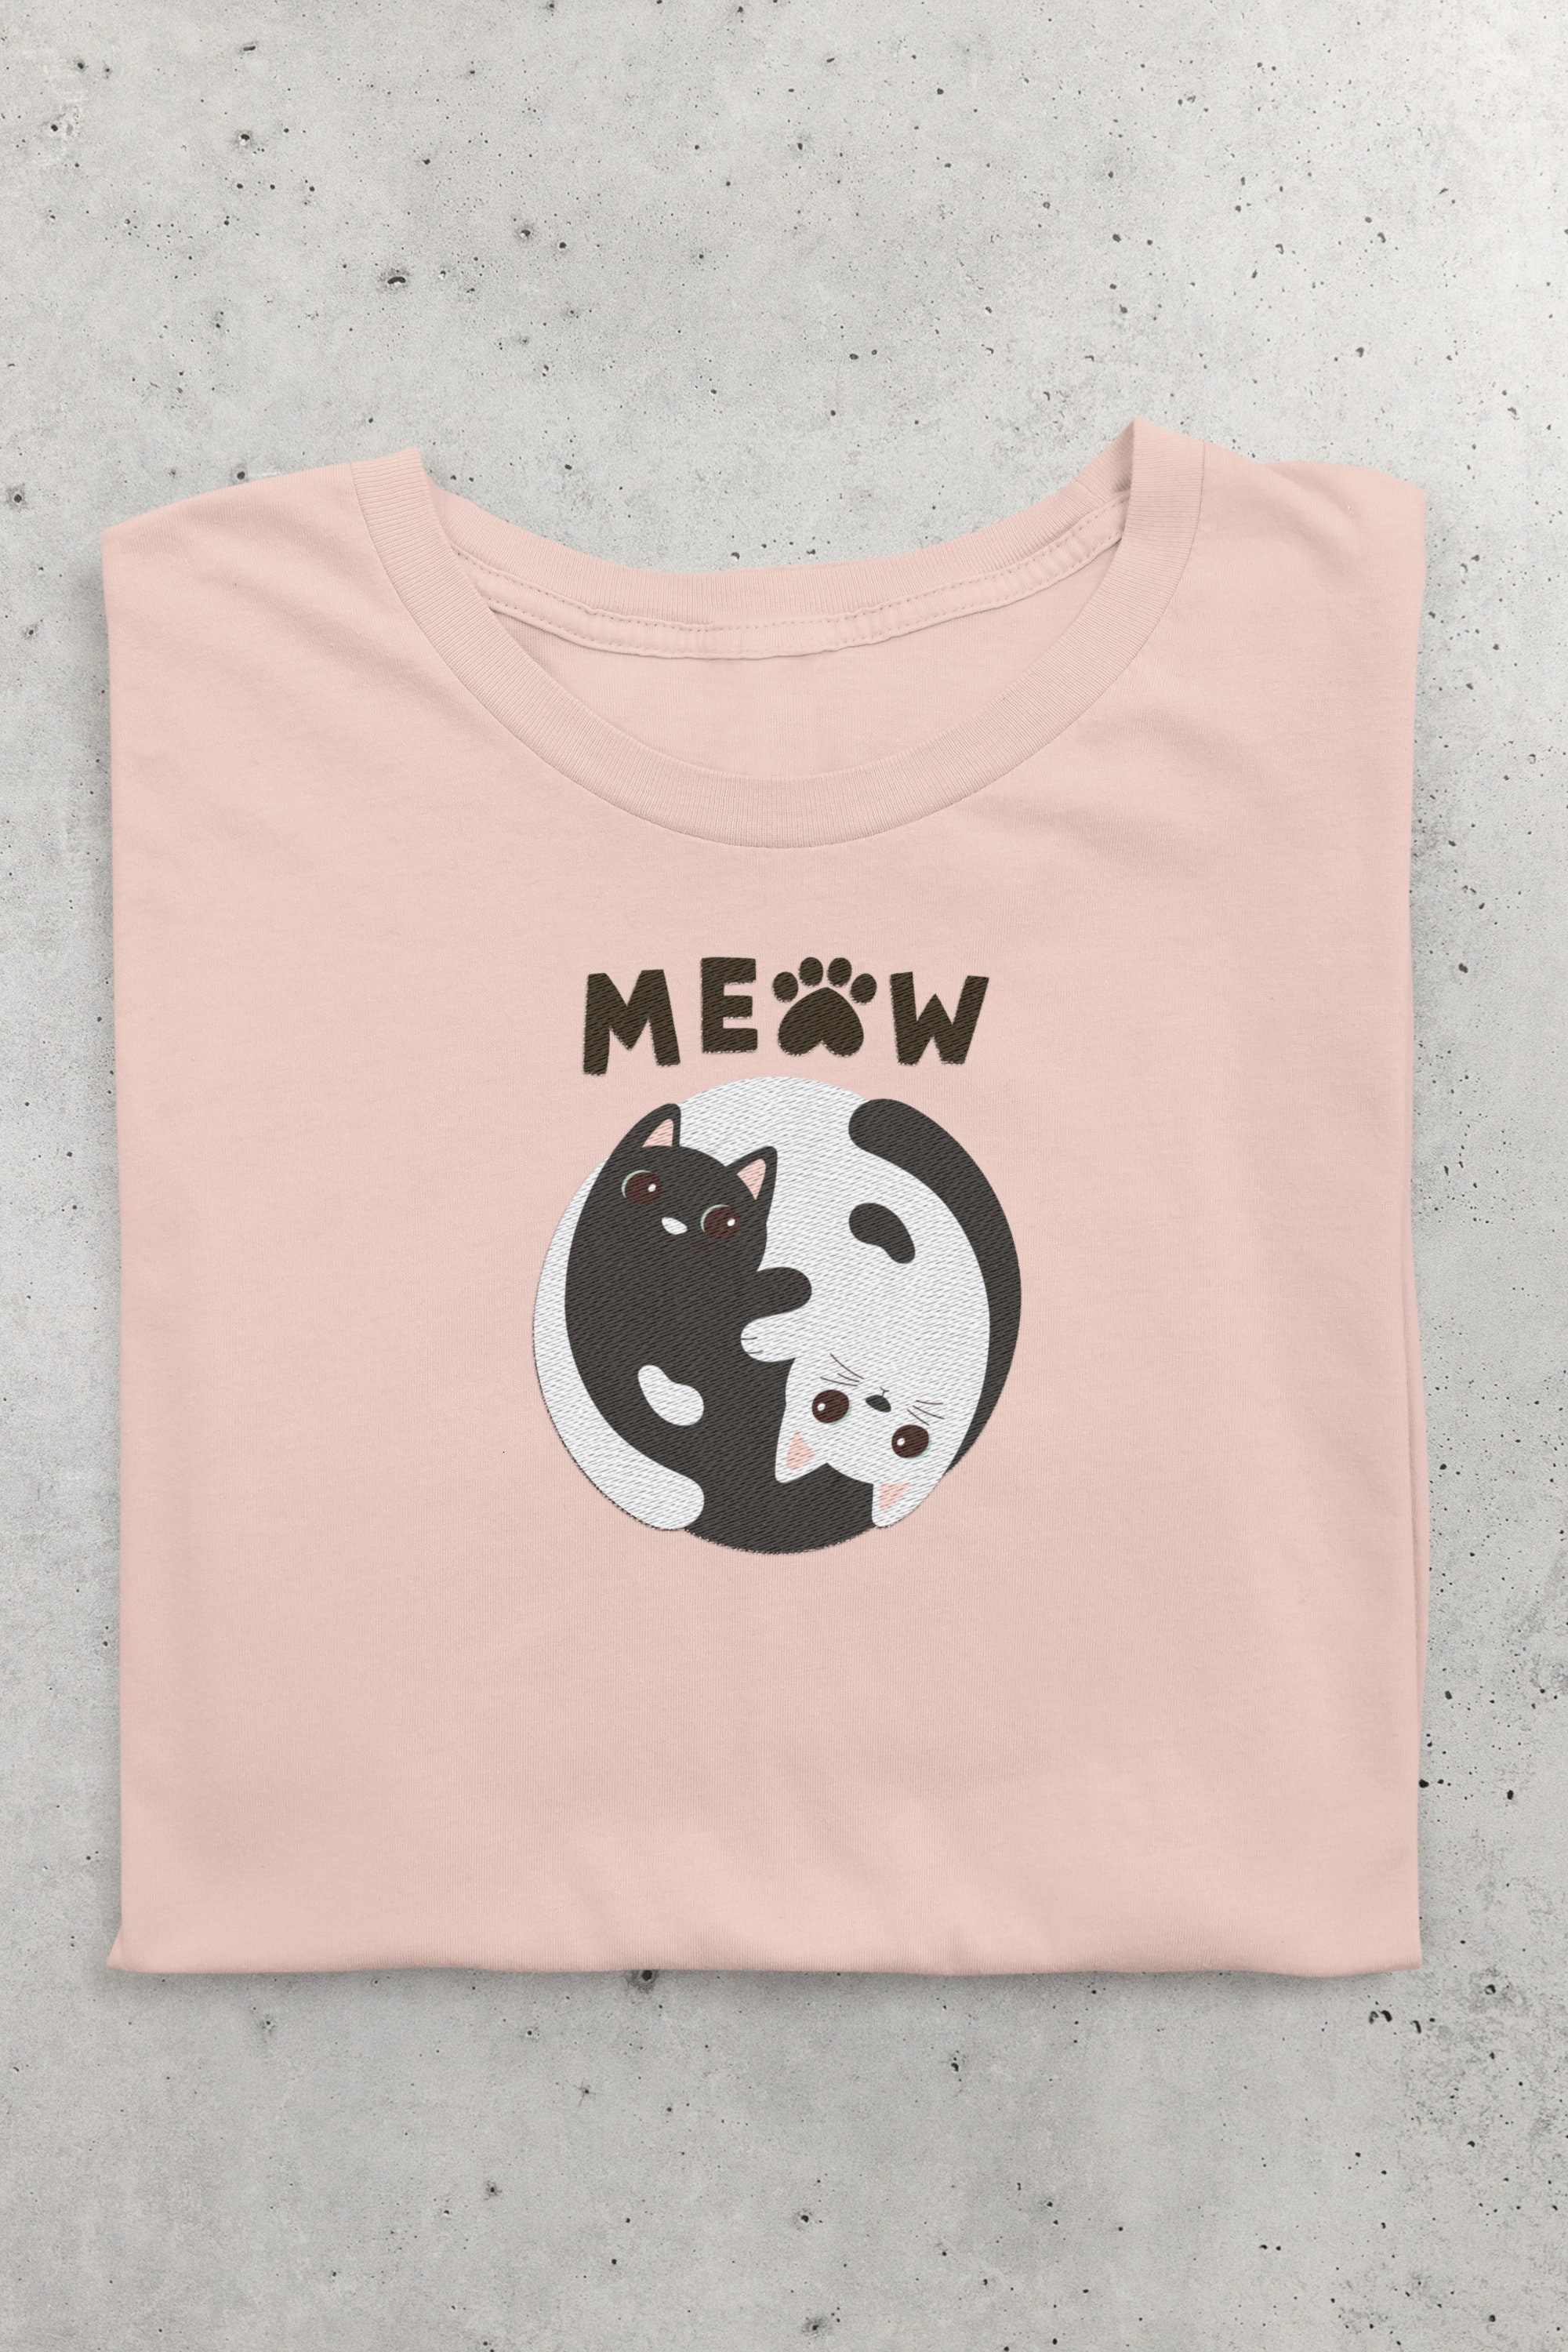 Trendy Fashion That's Purrfect for Cat Lovers